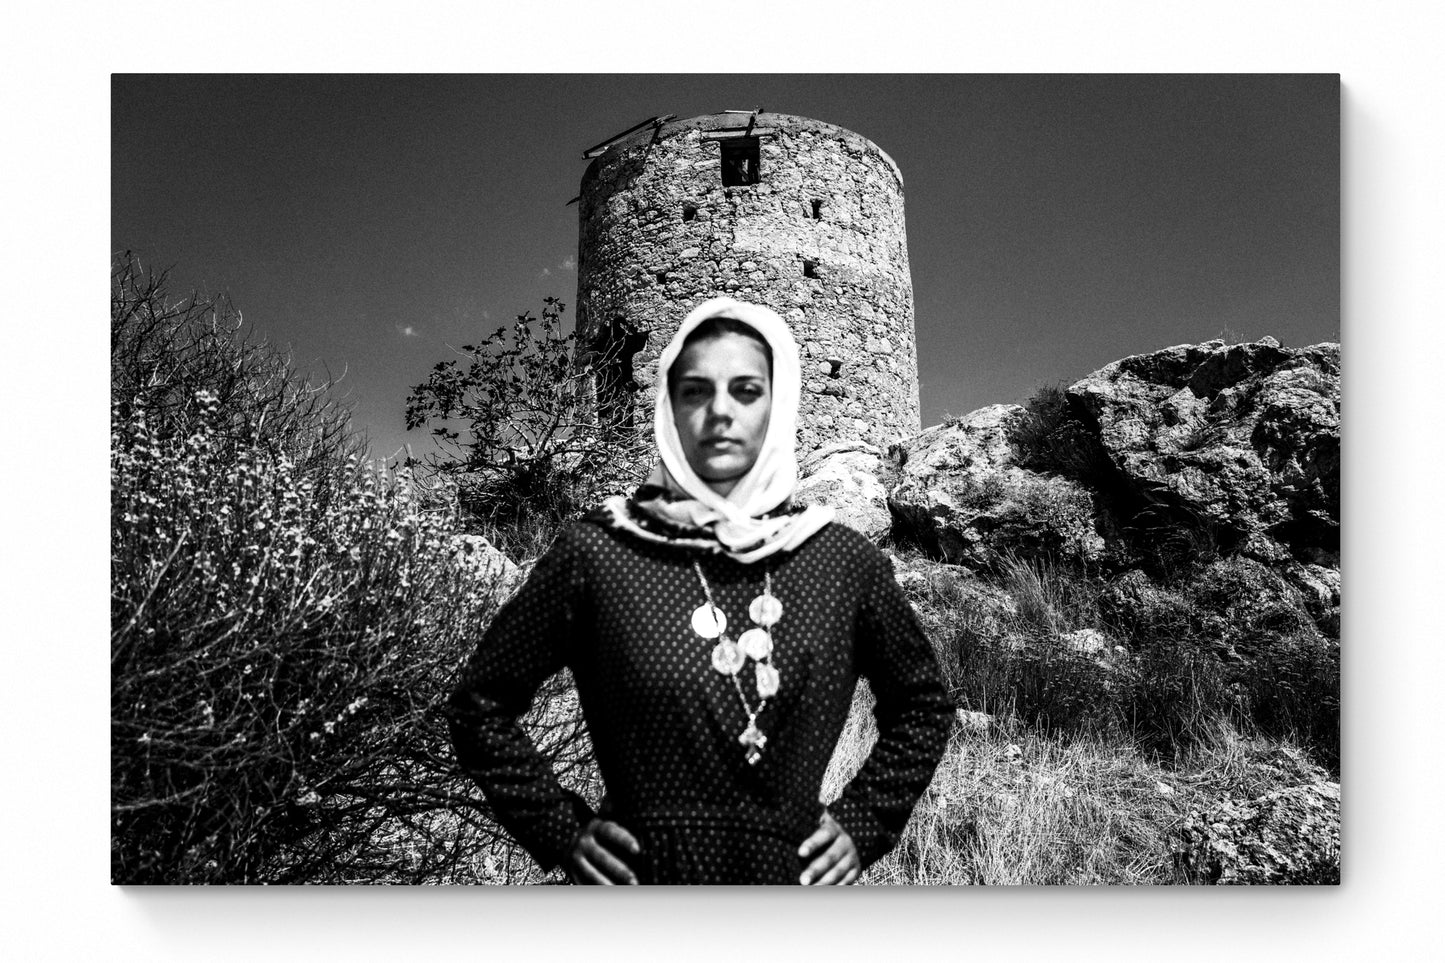 Black and White Photography Wall Art Greece | Castle Kalymnos Dodecanese by George Tatakis - whole photo